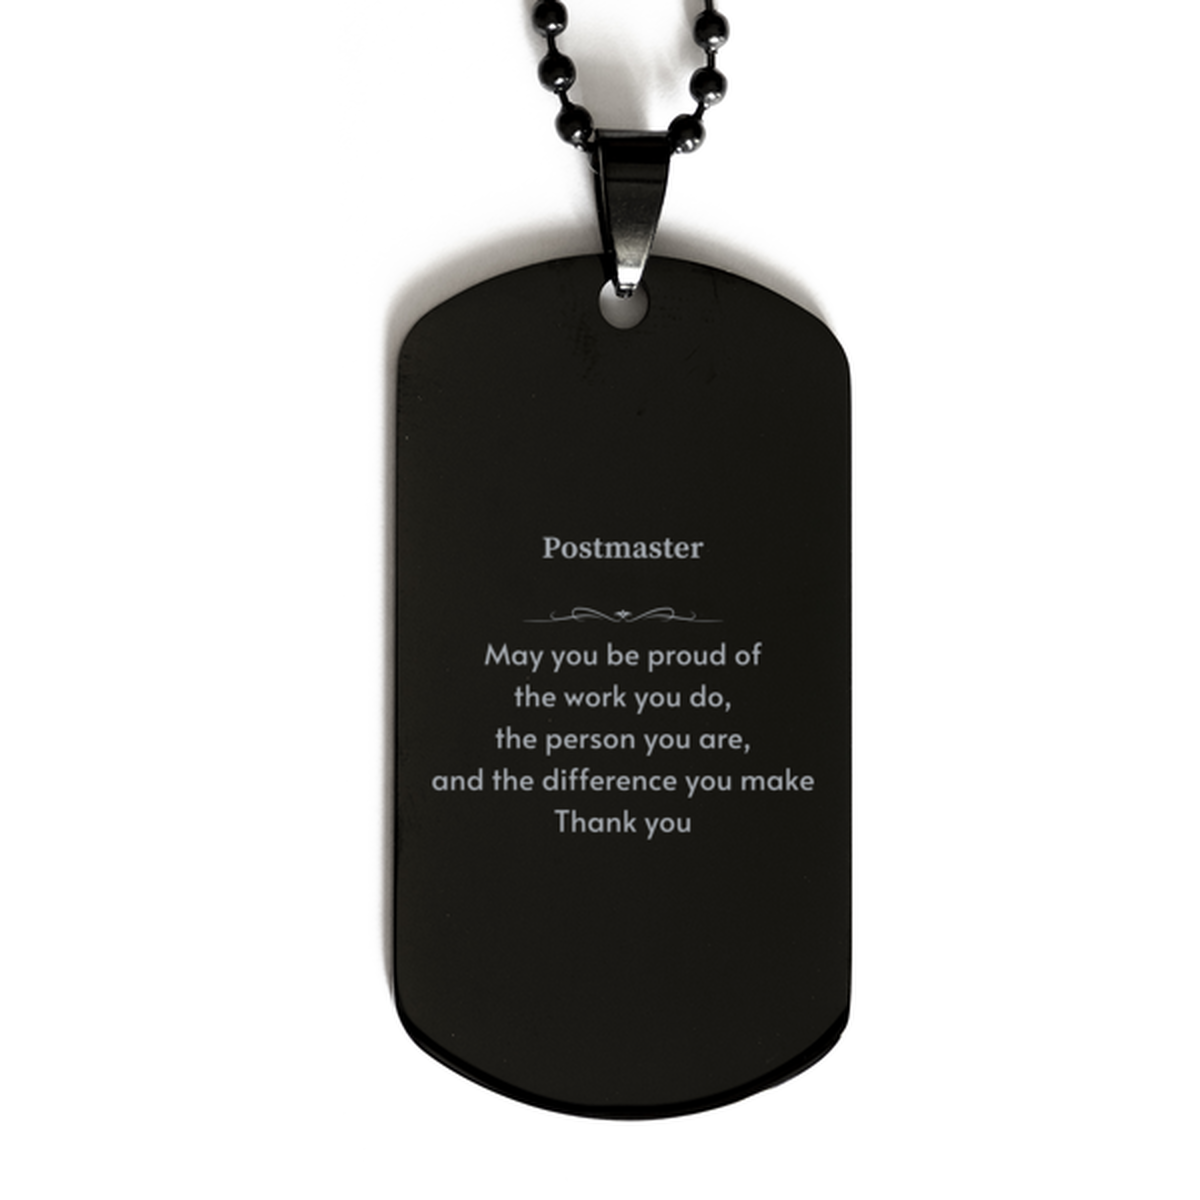 Heartwarming Black Dog Tag Retirement Coworkers Gifts for Postmaster, Postmaster May You be proud of the work you do, the person you are Gifts for Boss Men Women Friends